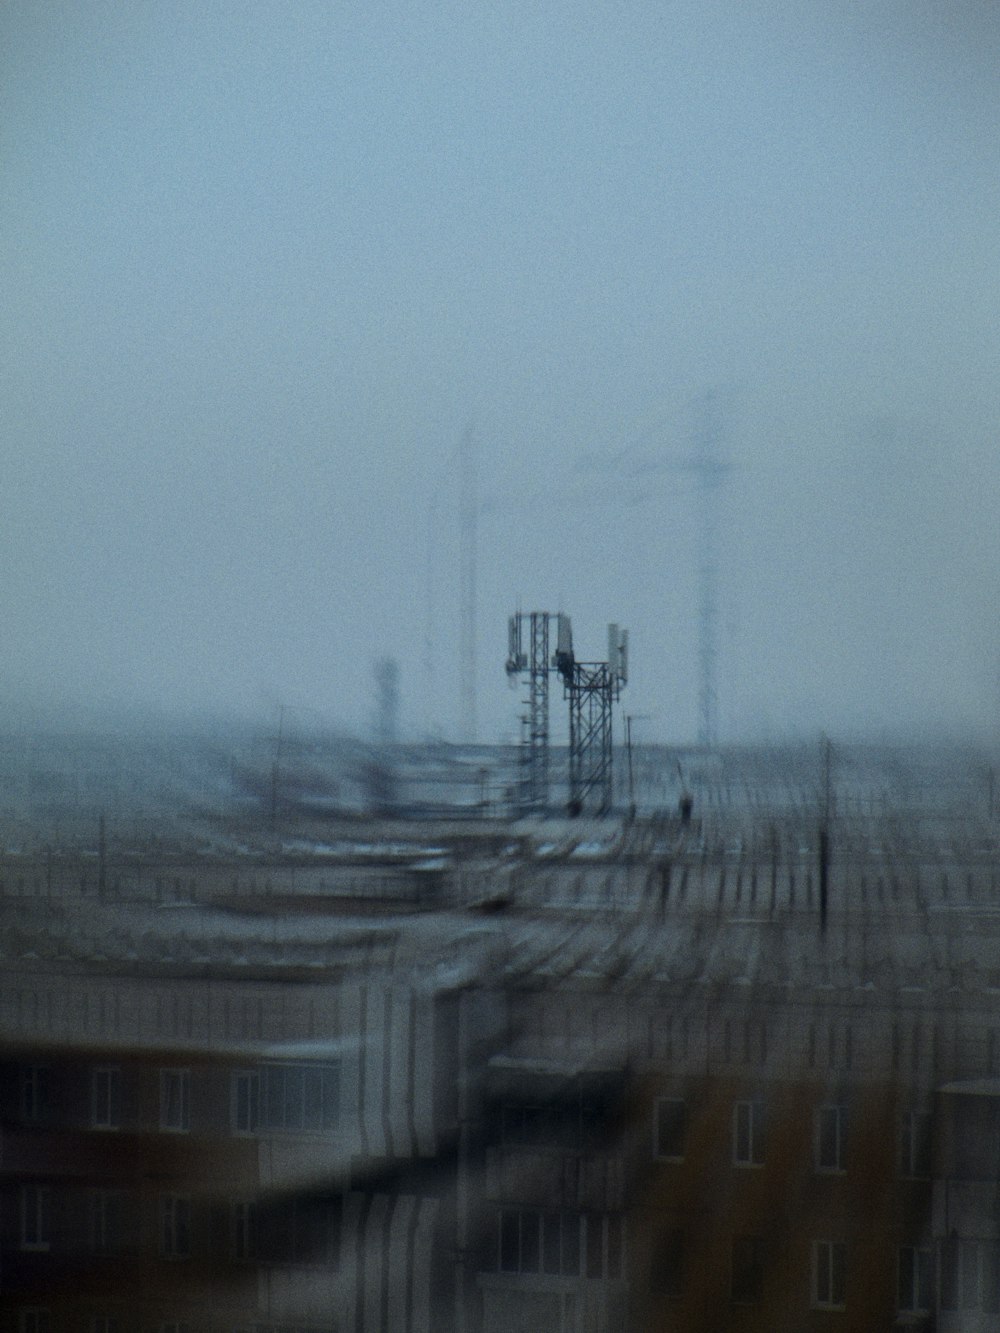 a blurry photo of a train station in the fog